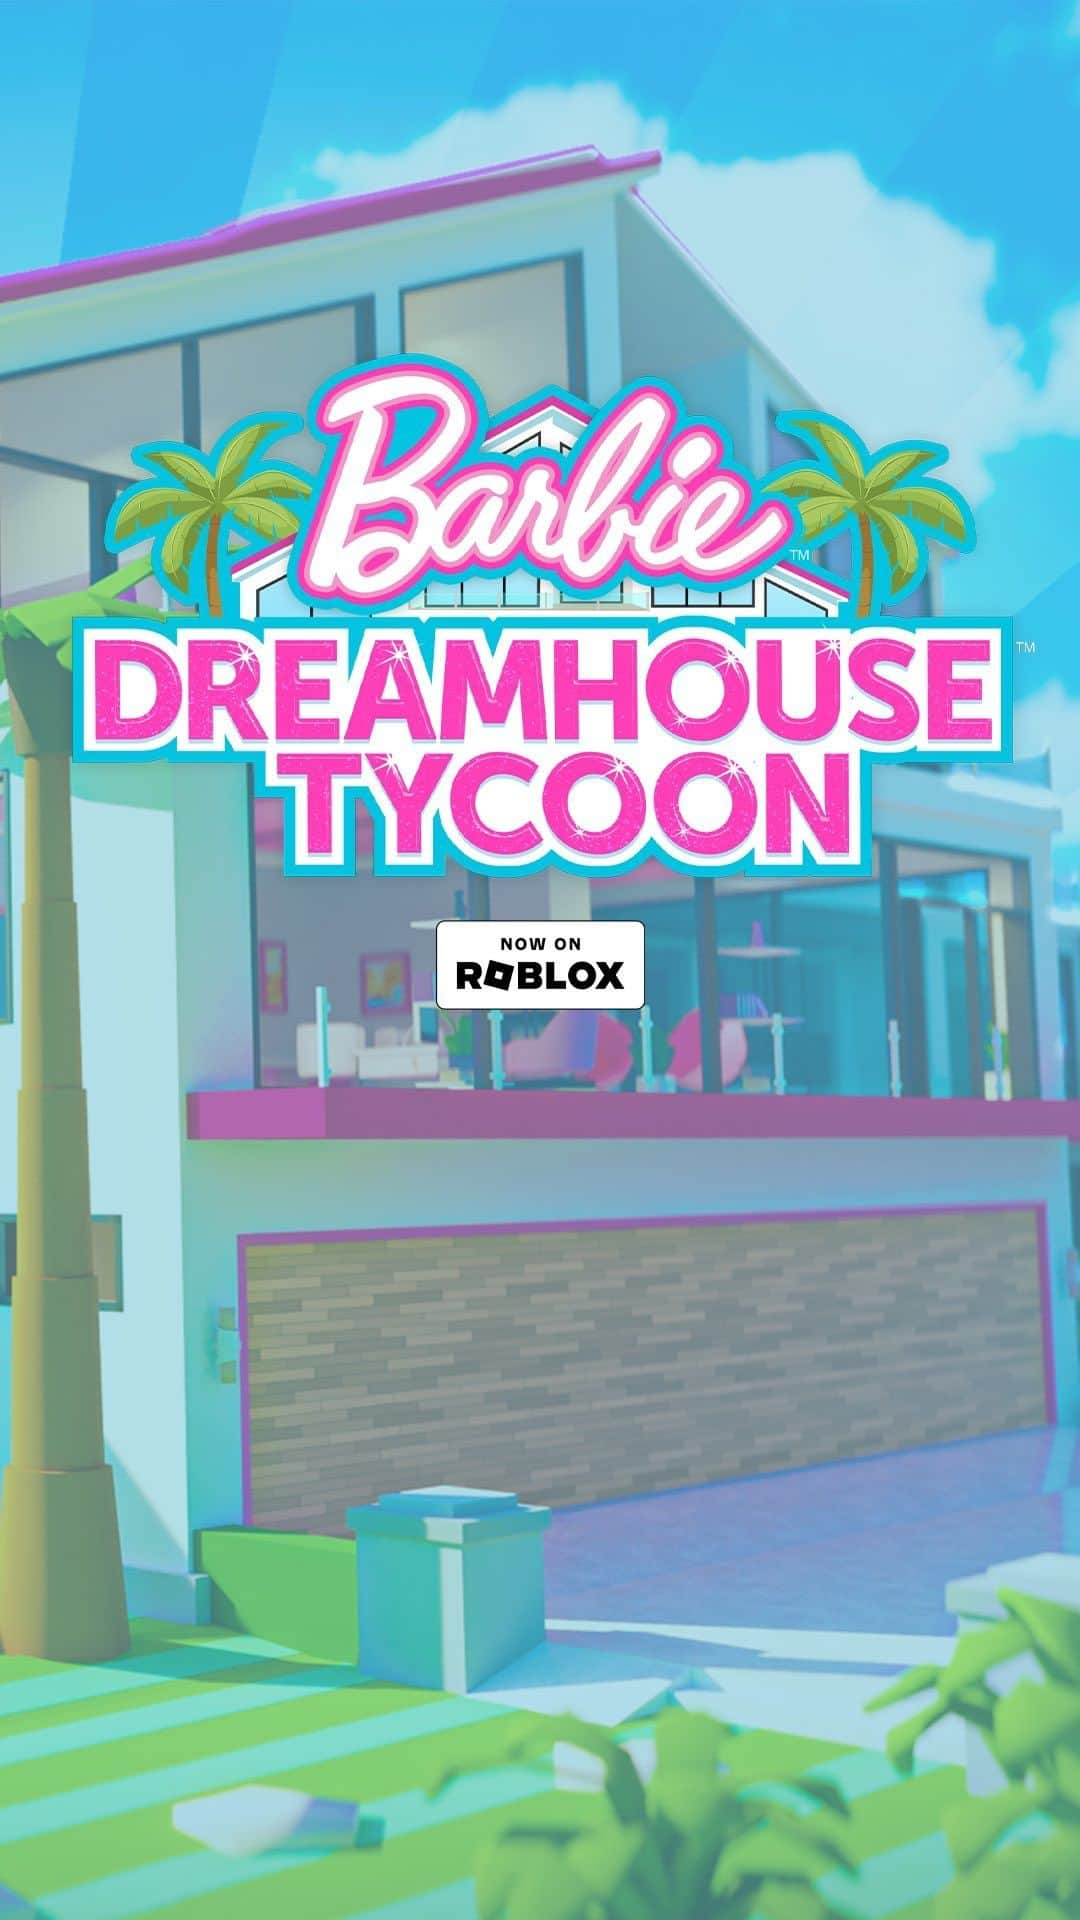 Mattelのインスタグラム：「Barbie DreamHouse Tycoon has arrived, exclusively on #Roblox! Explore the #Barbie universe and build your very own DreamHouse! 🏠🌟」